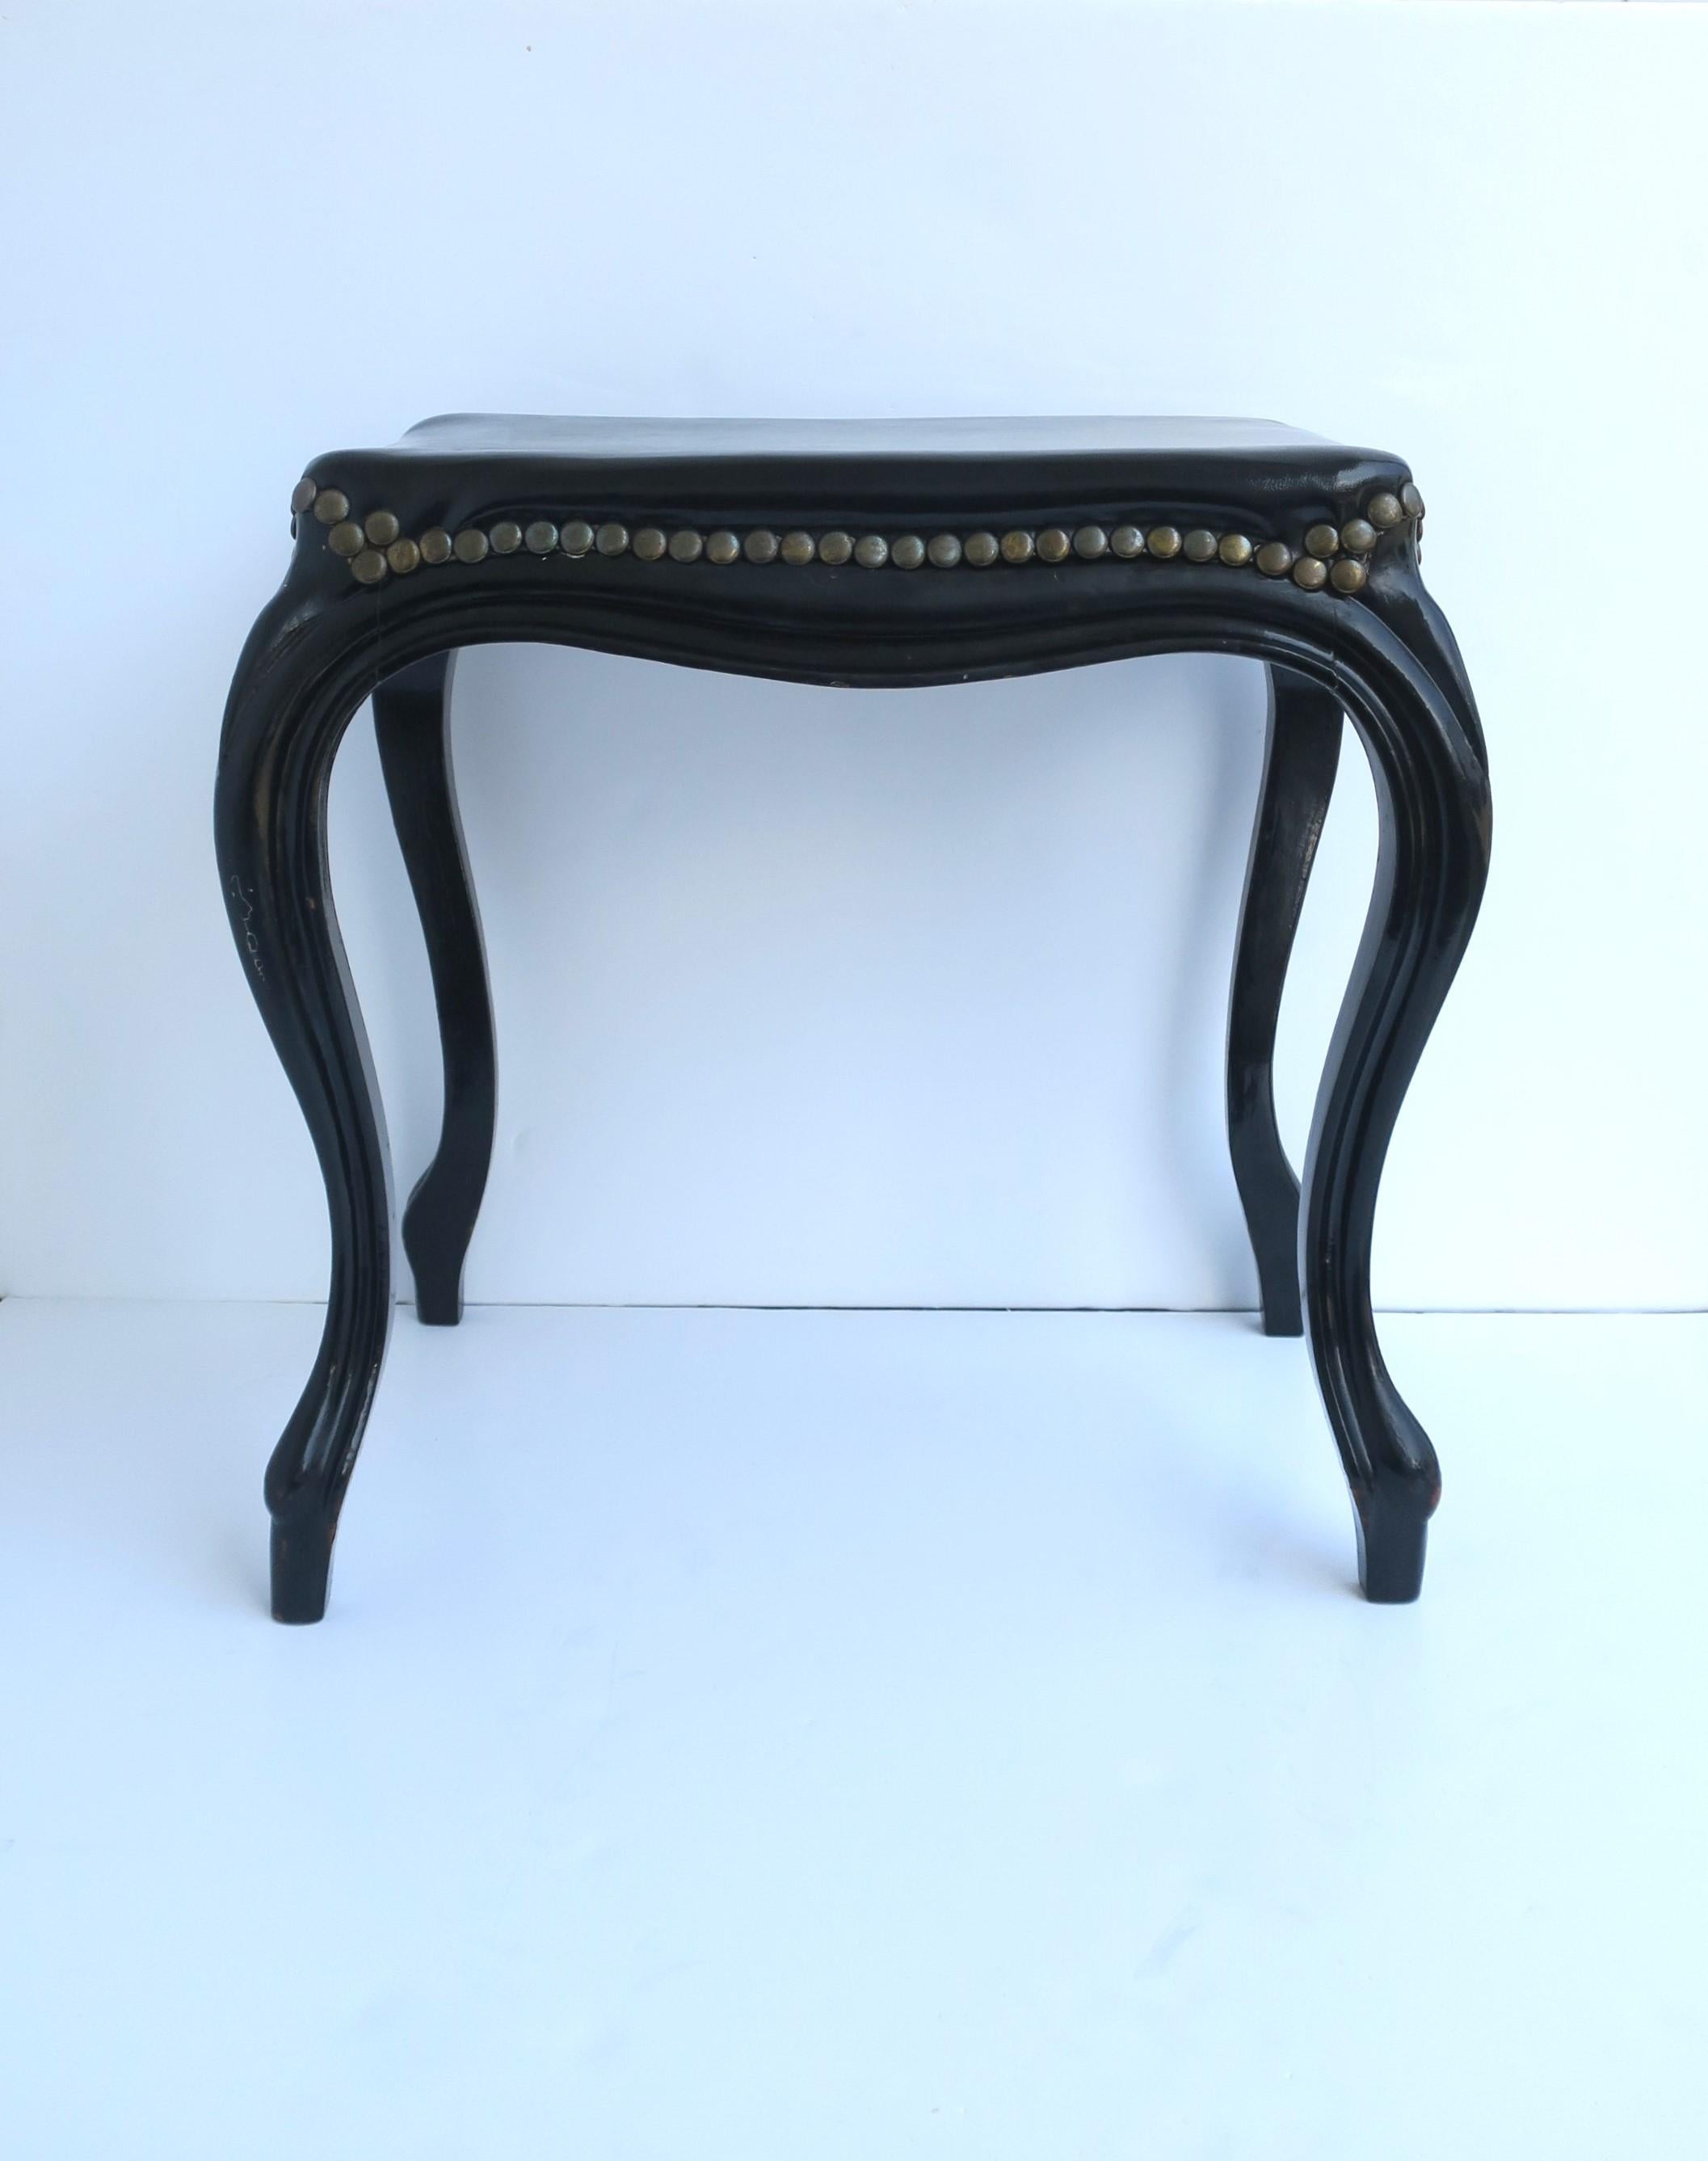 A chic French black wood bench or stool, Rococo Revival period, circa early-20th century, France. Bench or stool has beautiful Rococo Revival/Art Nouveau lines, a black lacquer high-gloss base, upholstered in a quality black pleather (faux-leather)